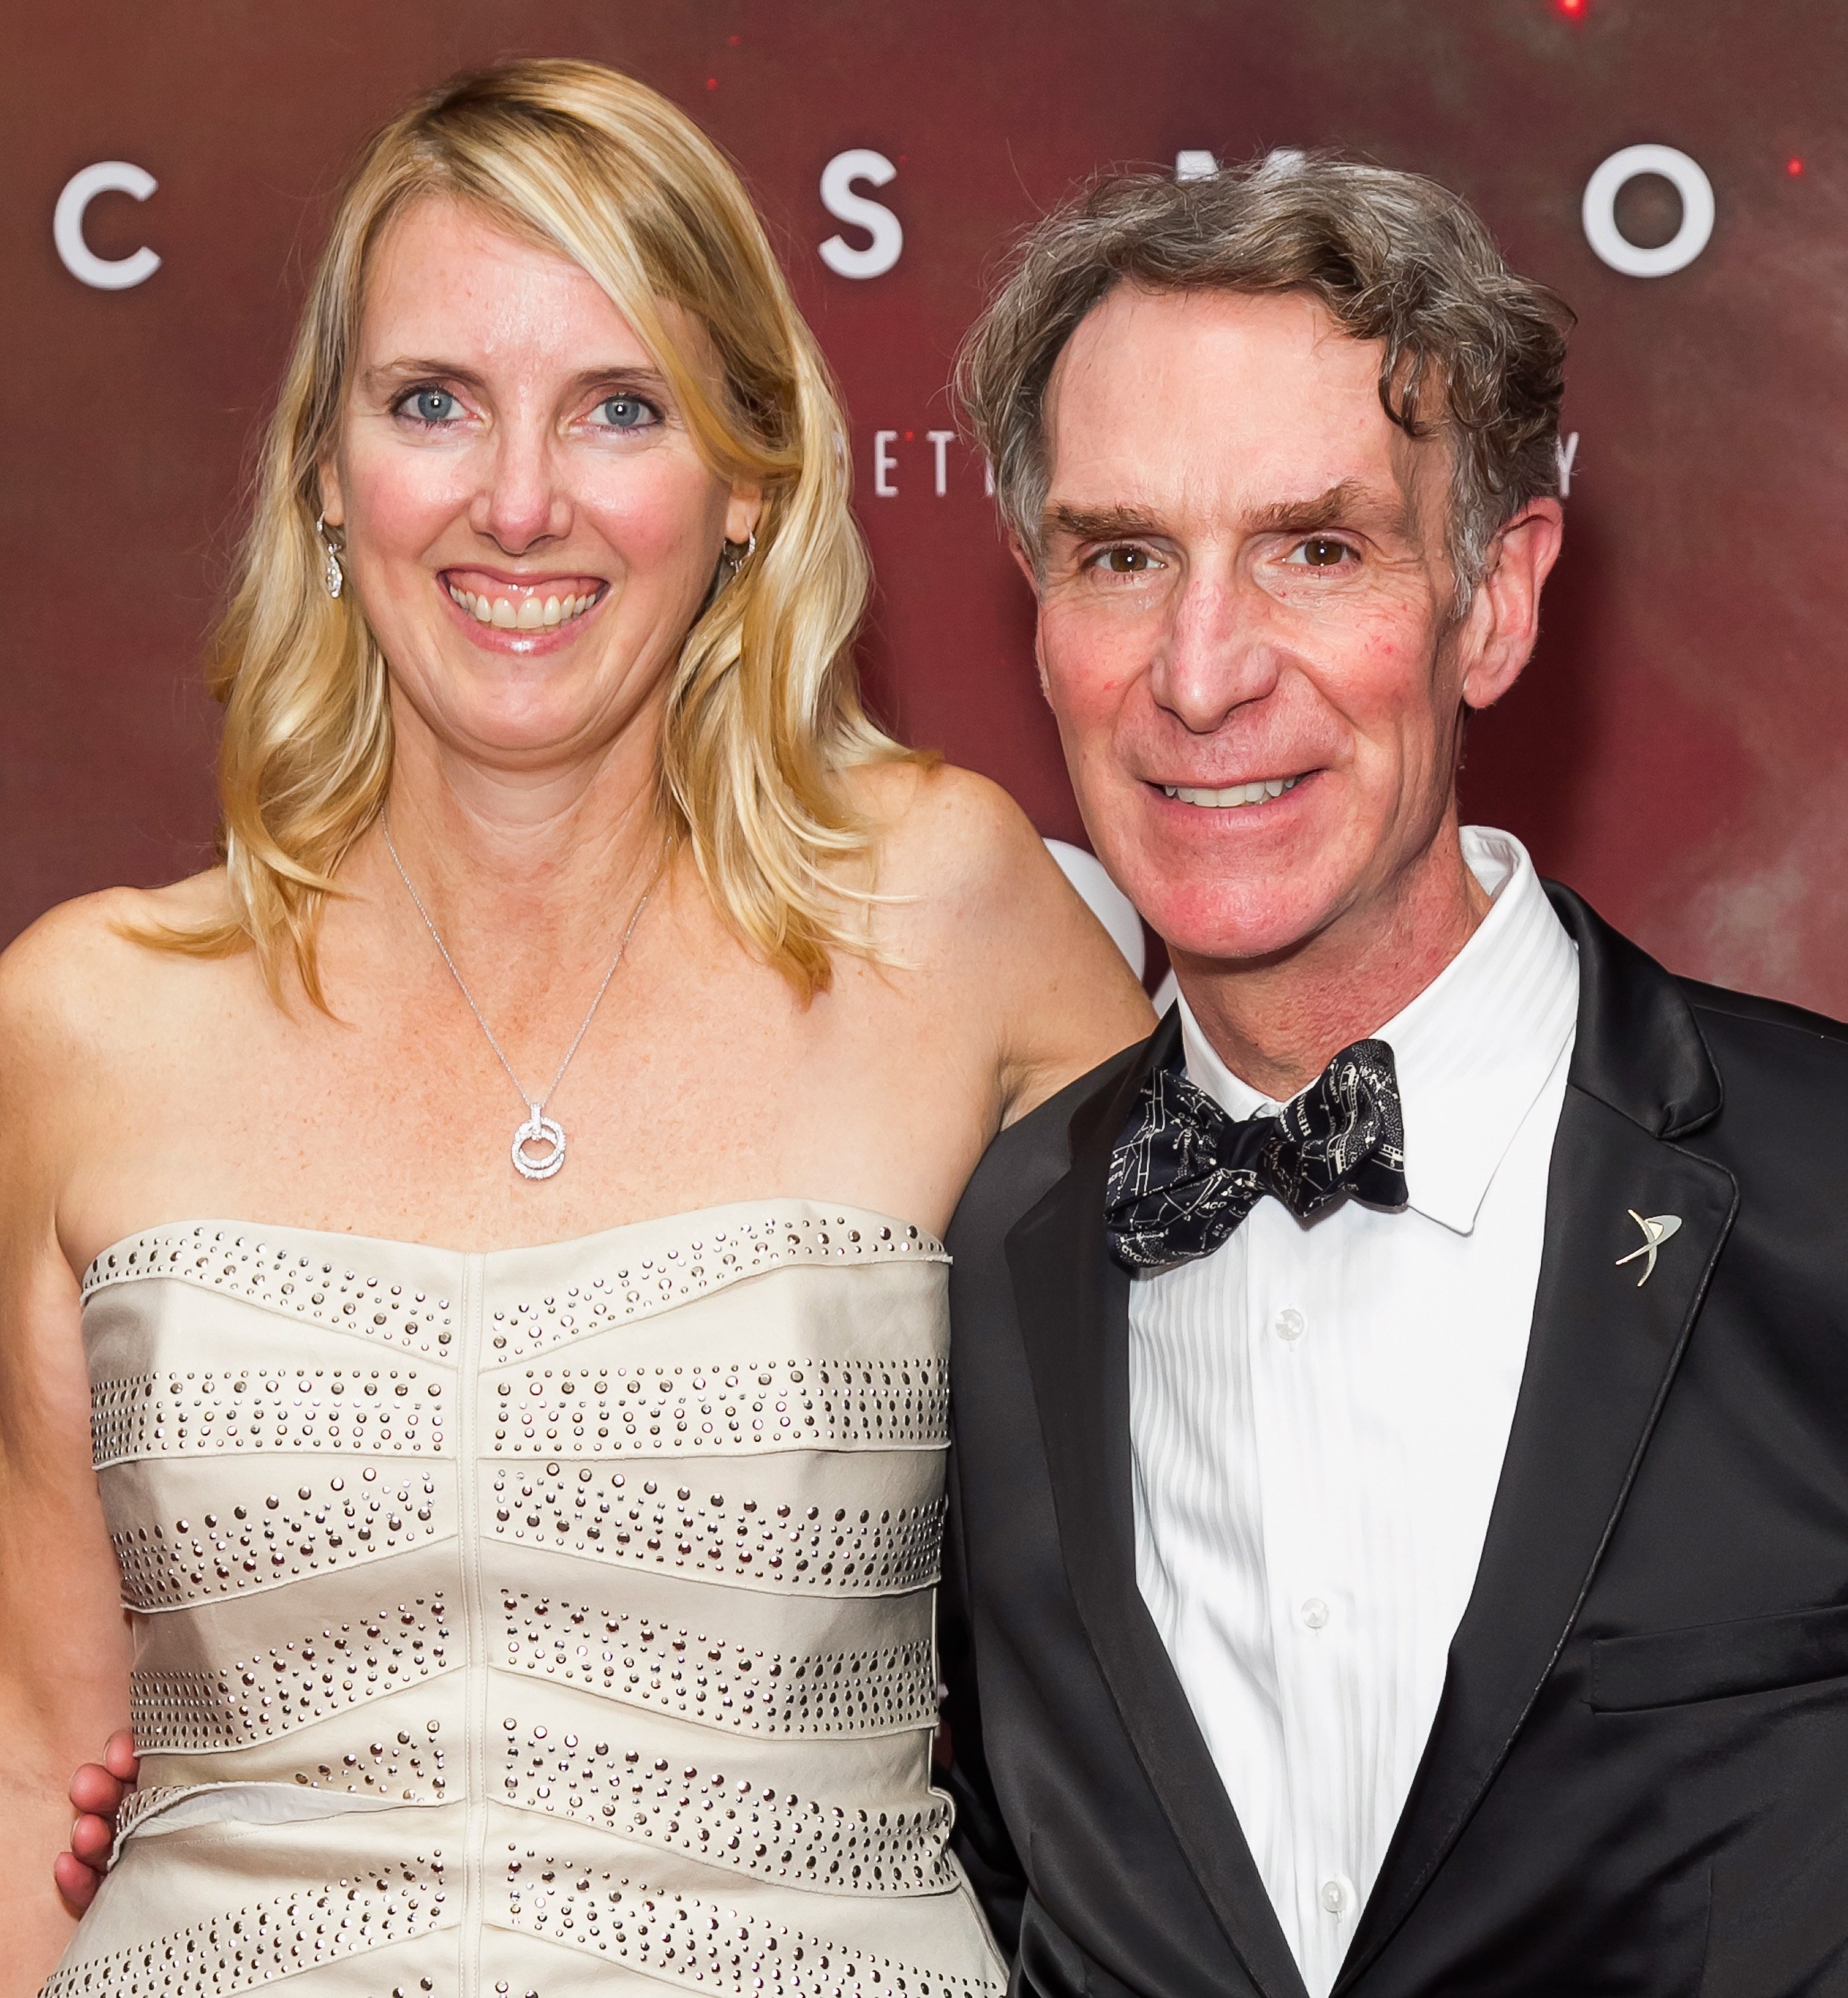 Blair Tindall and Bill Nye at the premiere of "Cosmos: A SpaceTime Odyssey" on March 4, 2014 | Source: Getty Images